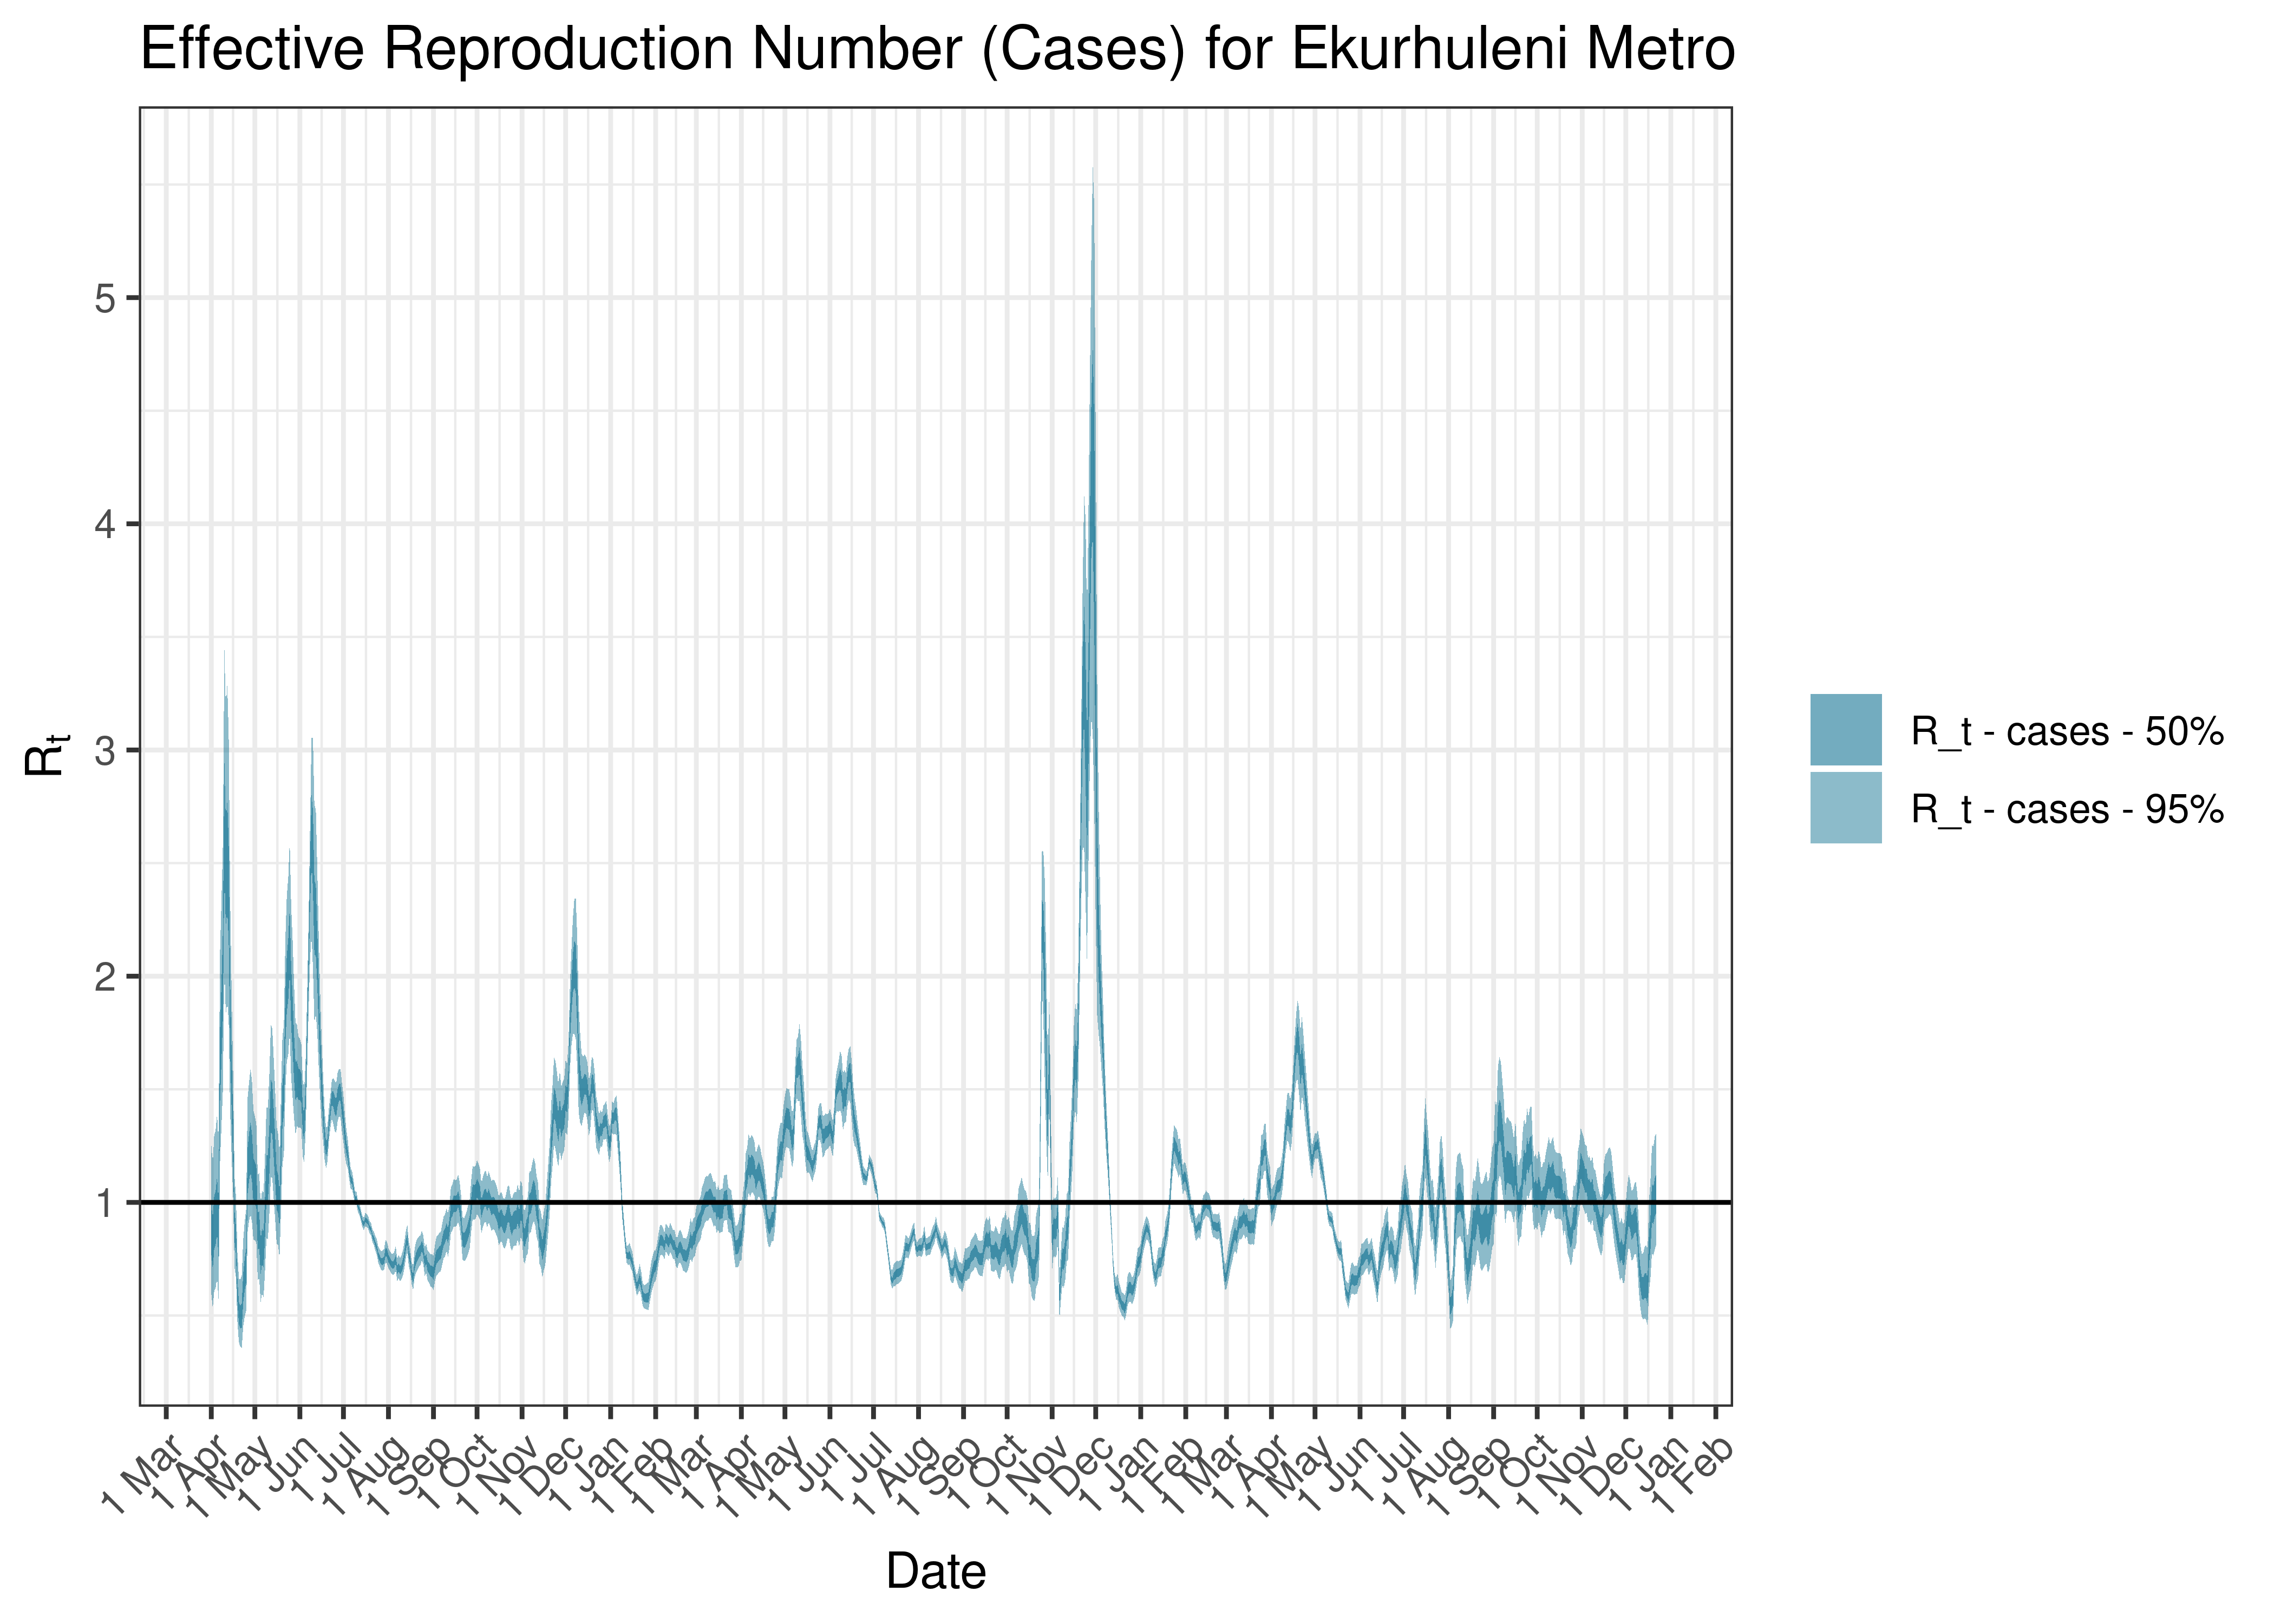 Estimated Effective Reproduction Number Based on Cases for Ekurhuleni Metro since 1 April 2020